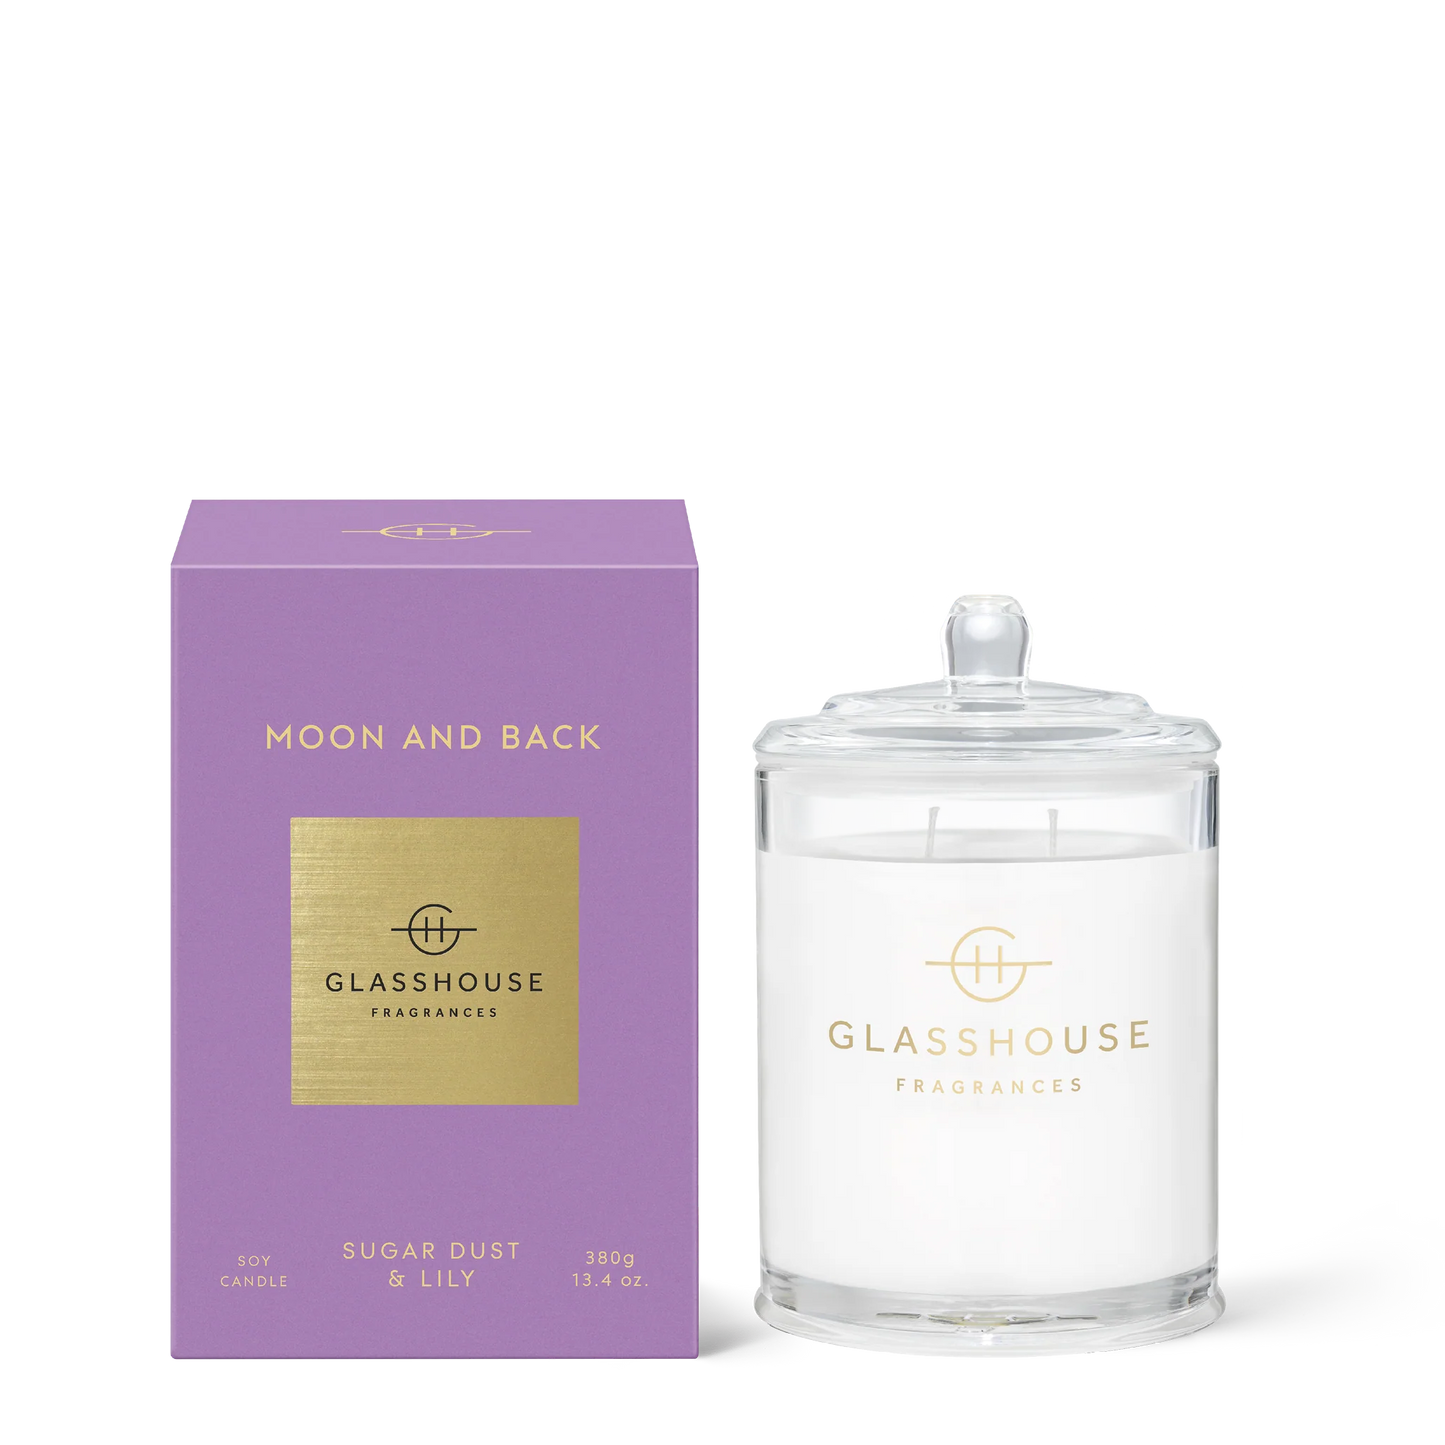 Glasshouse Fragrances - Moon and Back Triple Scented Candle